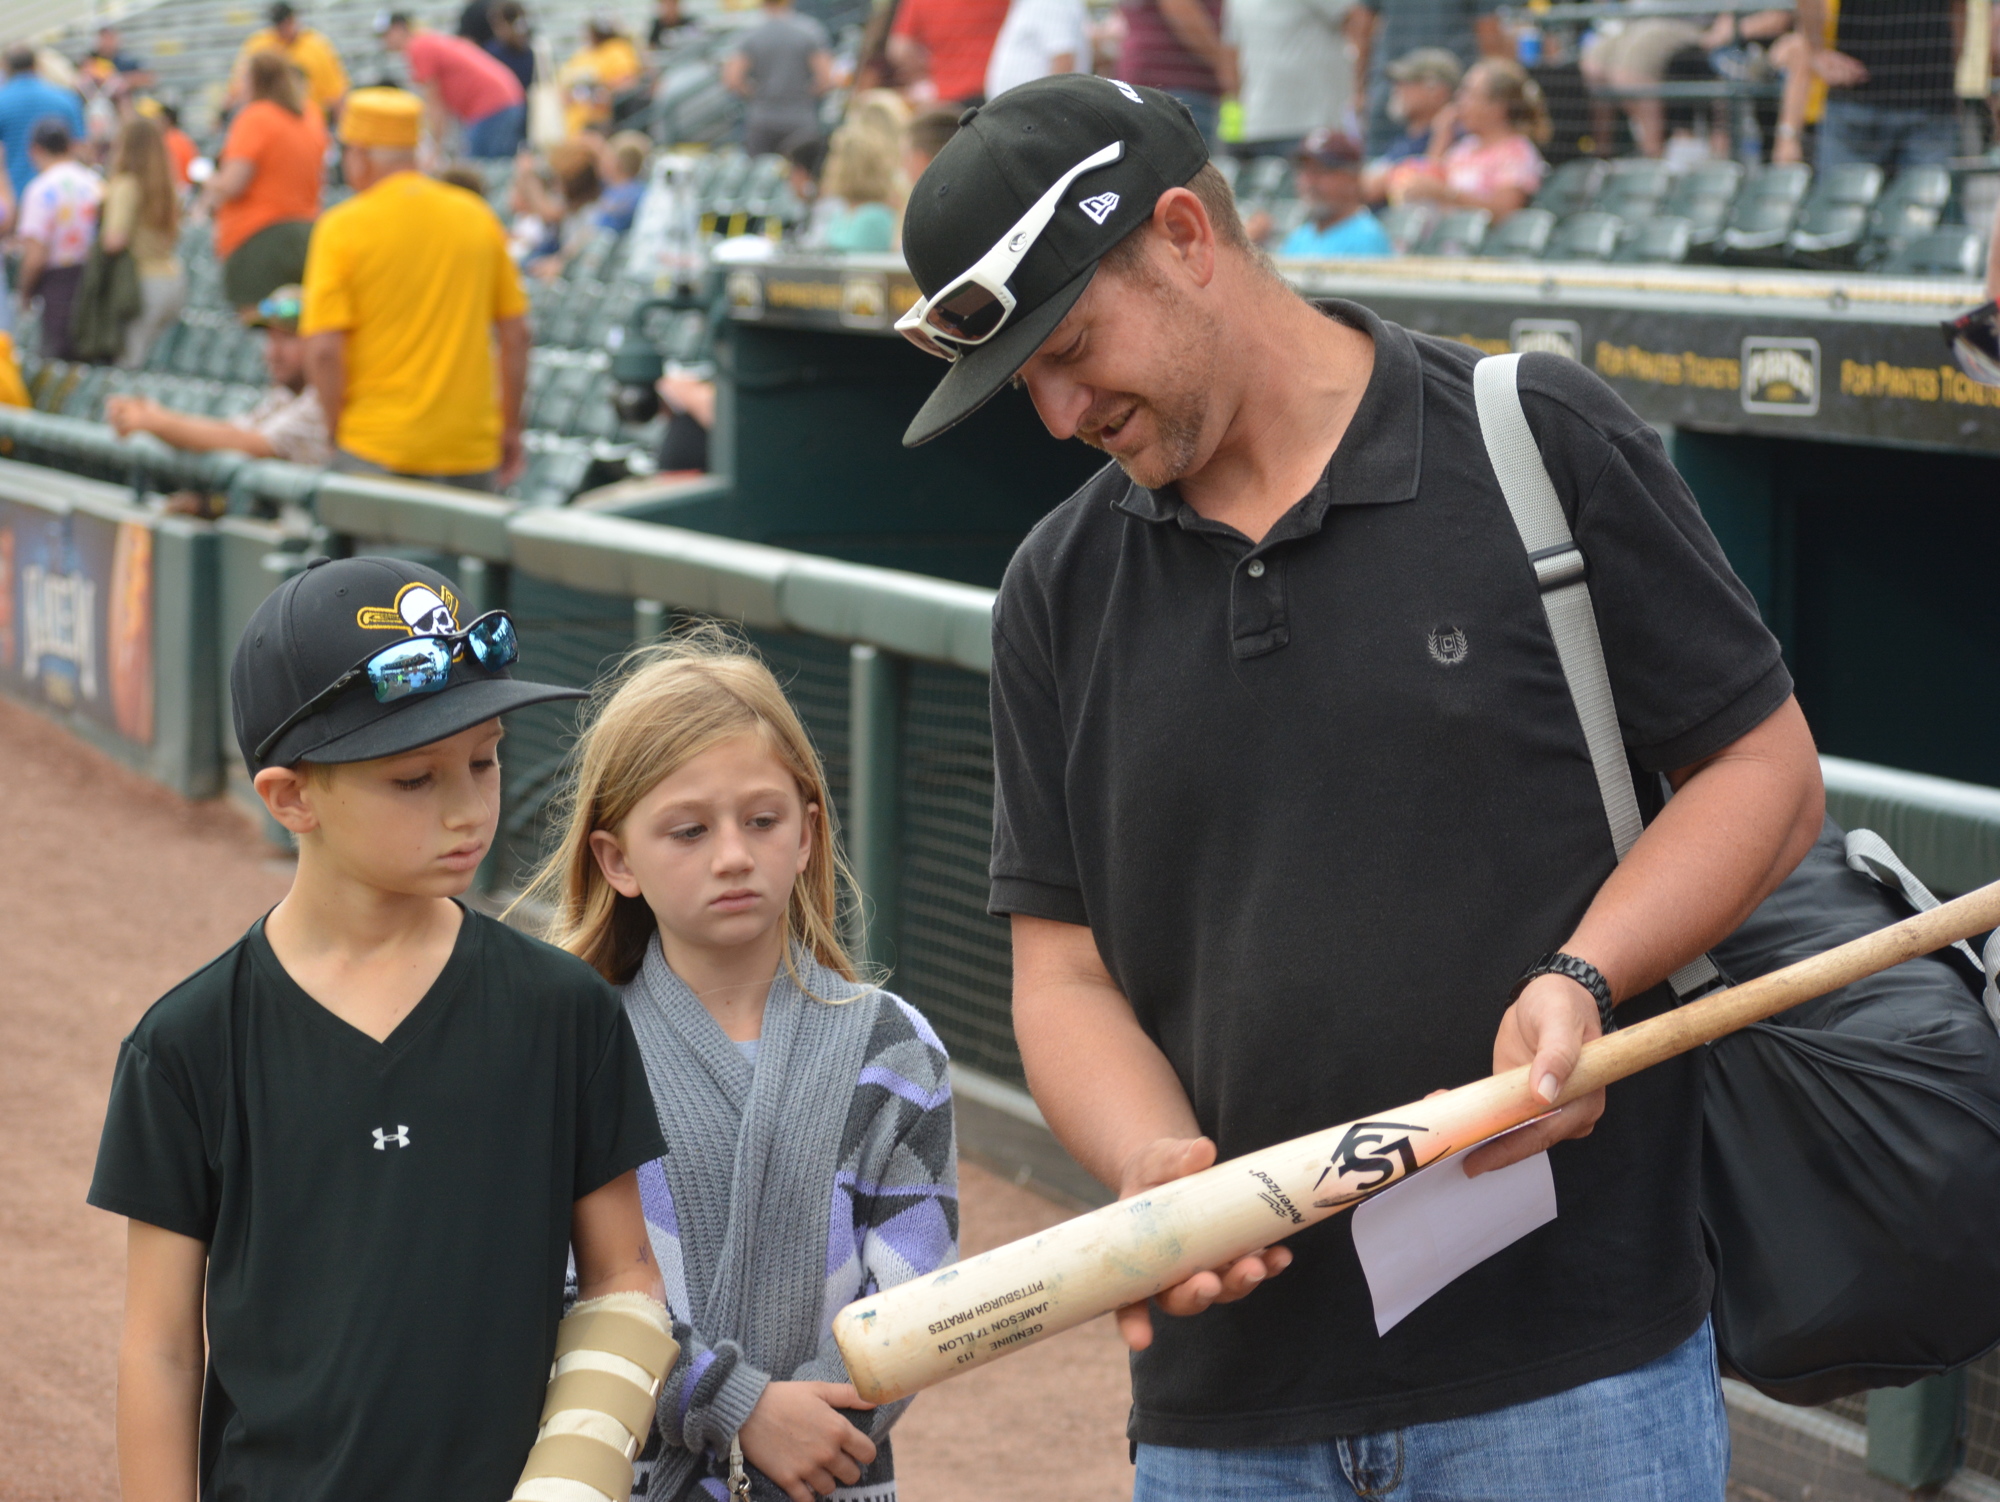 Landon, Camilla and Daryl Marazon check out a bat that was signed by the Marauders and given to Landon.